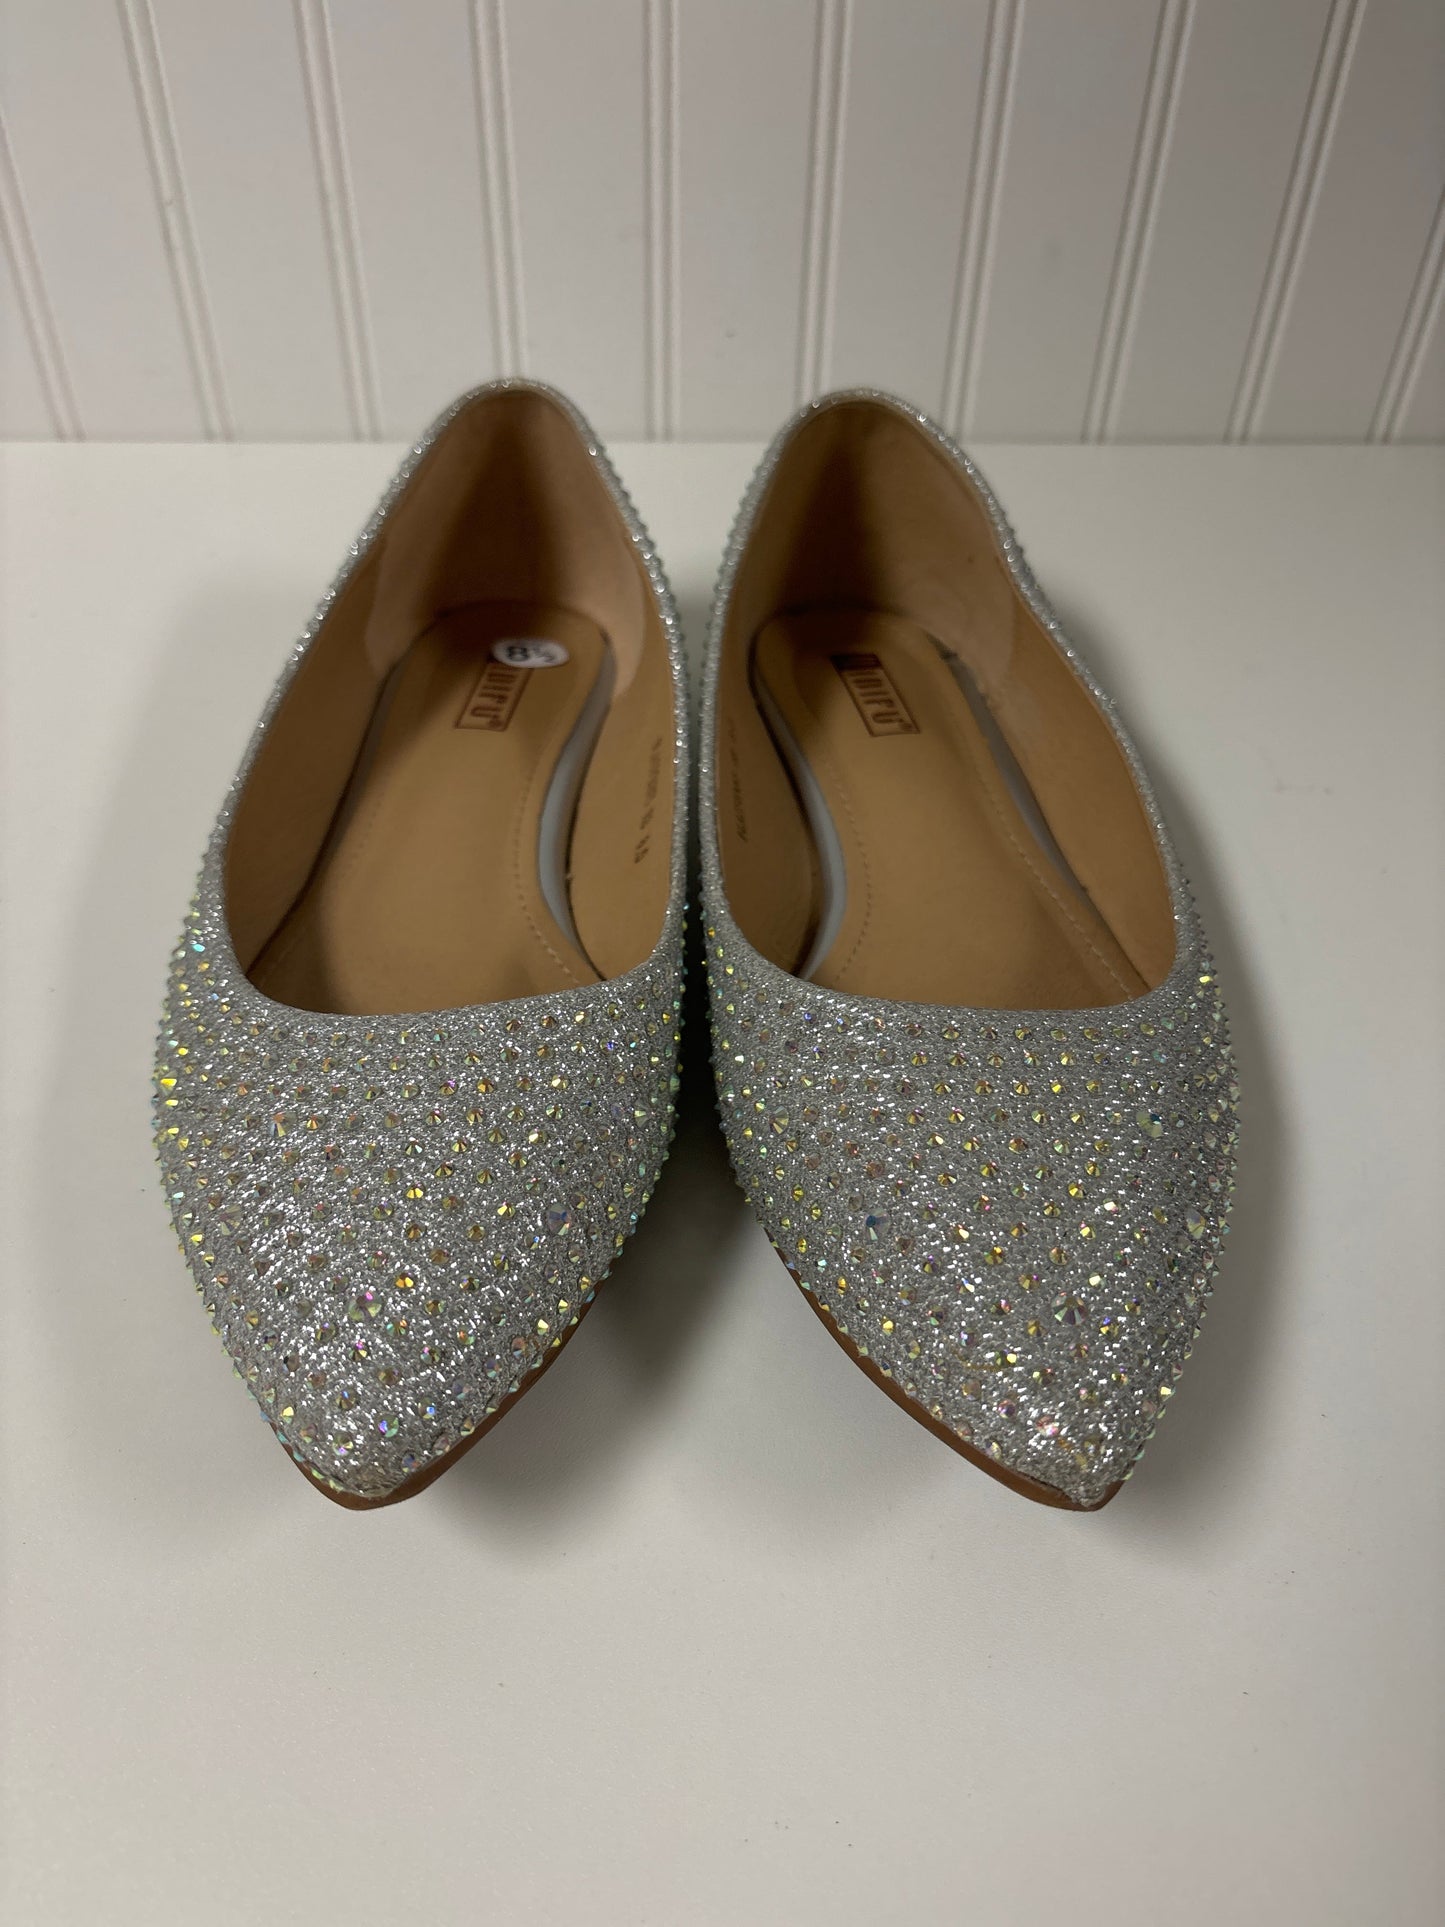 Silver Shoes Flats Clothes Mentor, Size 8.5